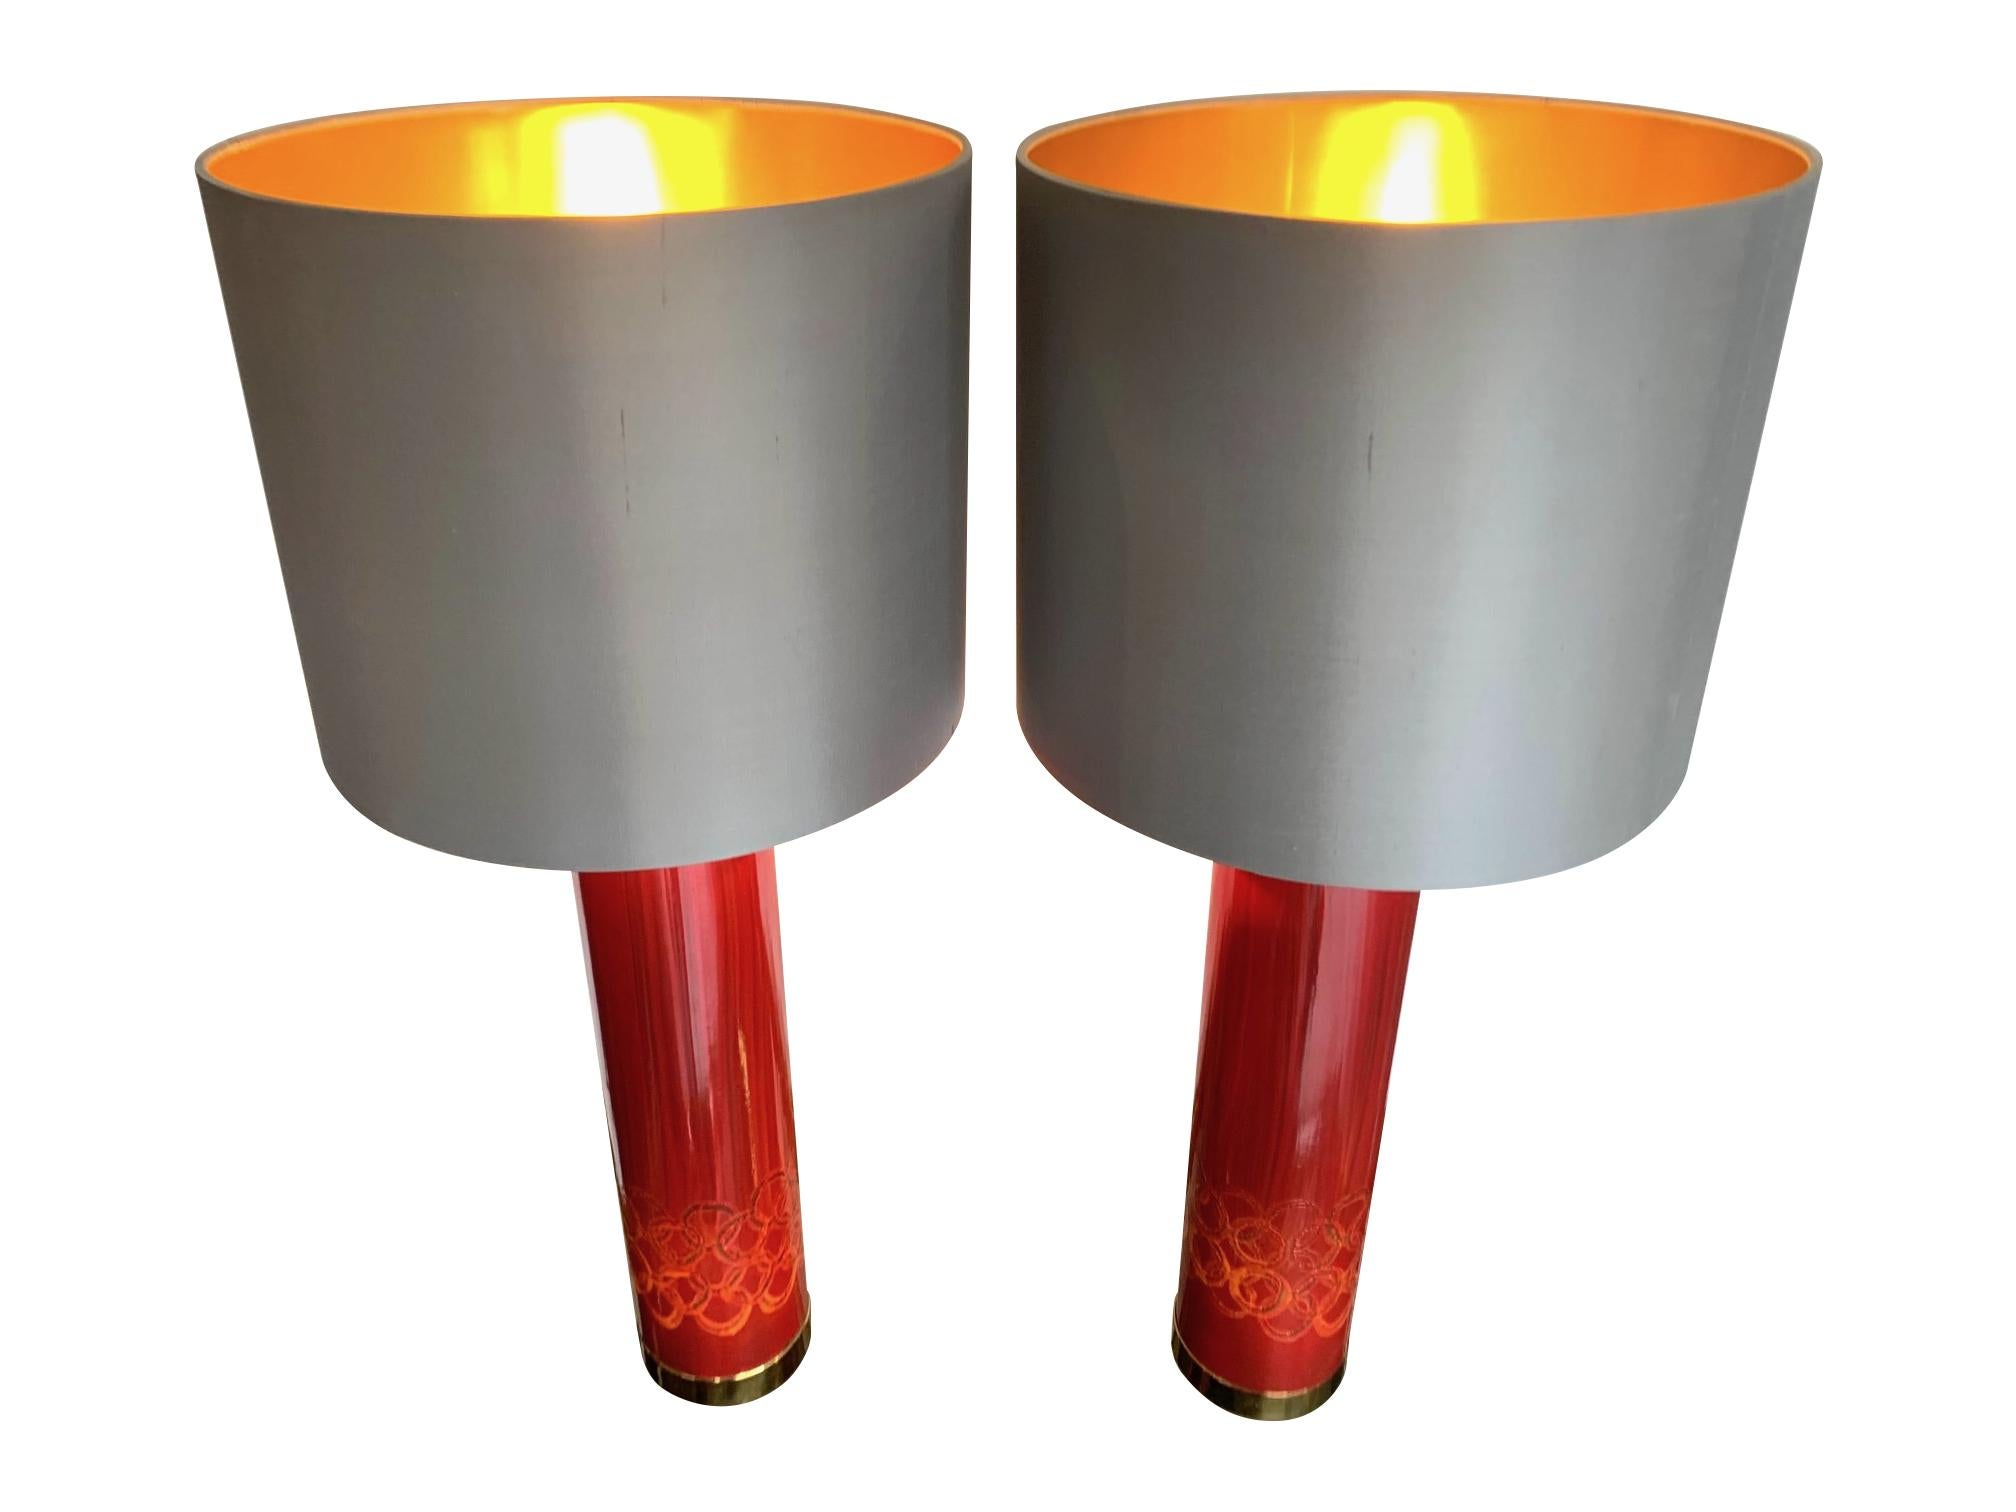 Lovely Pair of Swedish Red Ceramic Lamps Brass Fittings and New Bespoke Shades For Sale 2